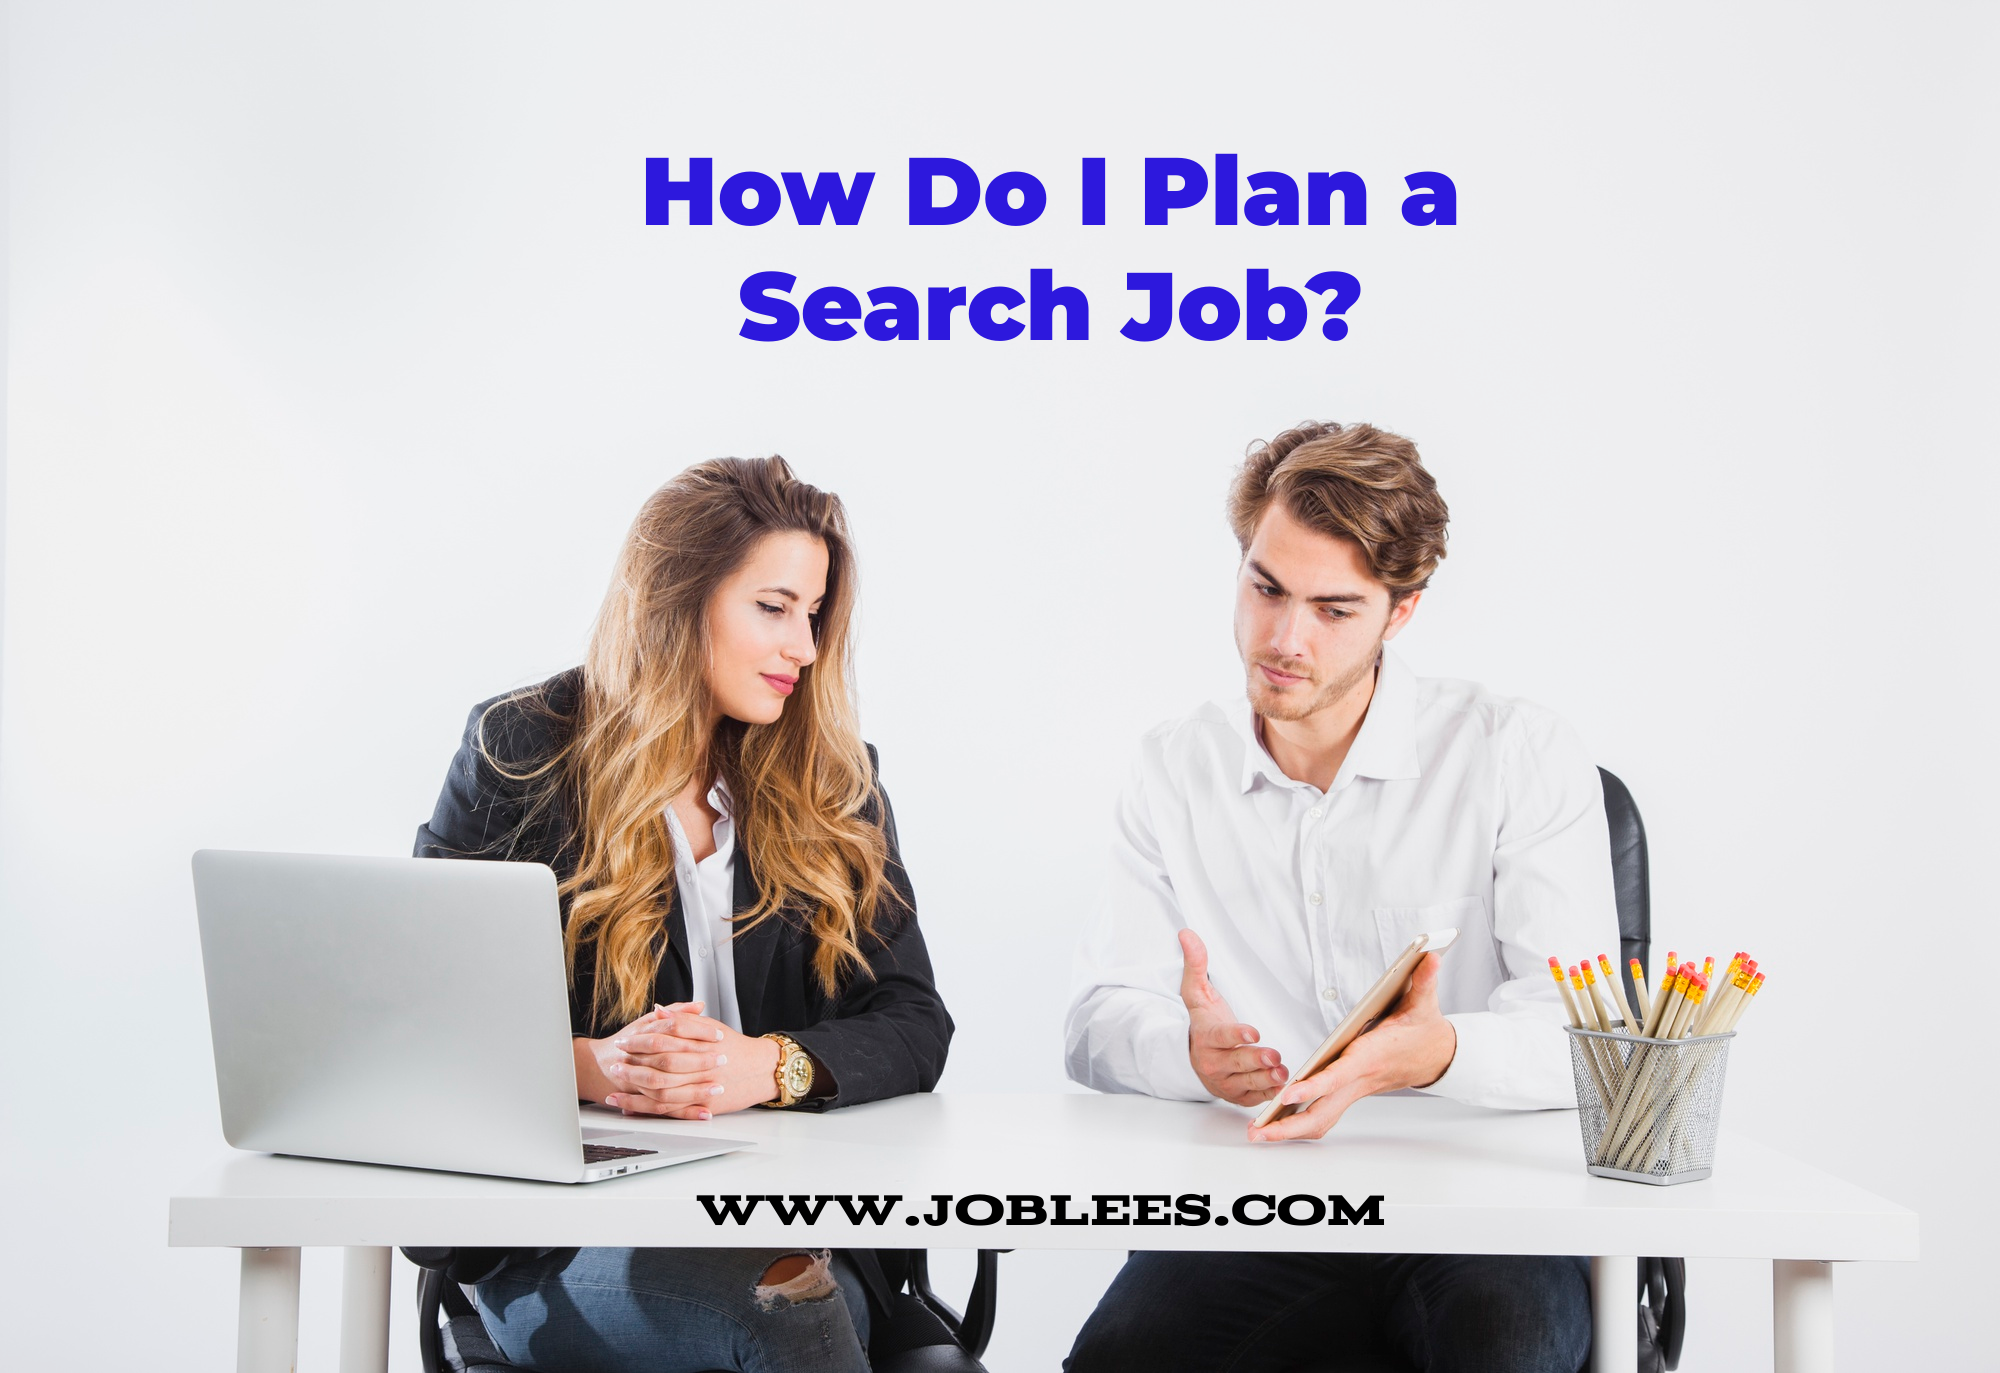 How do I plan a job search